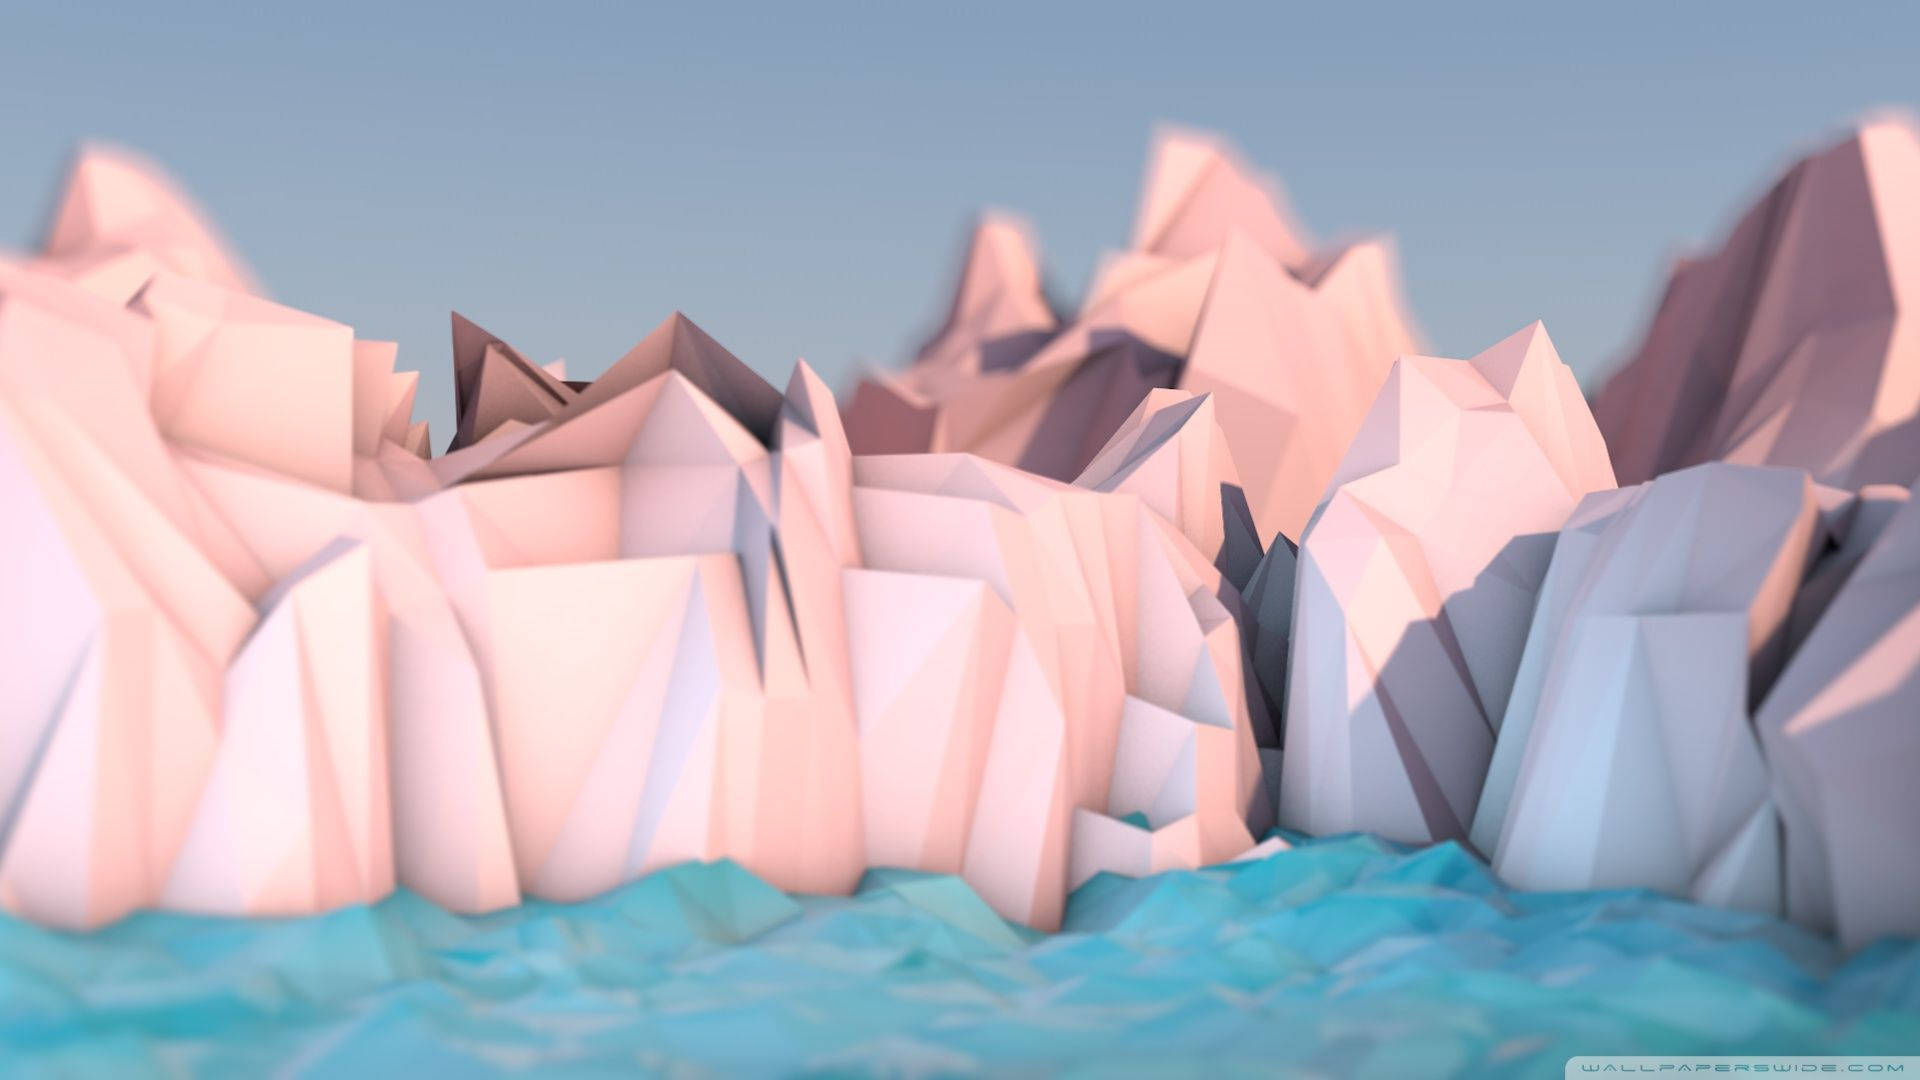 Light-colored Low Poly Mountains